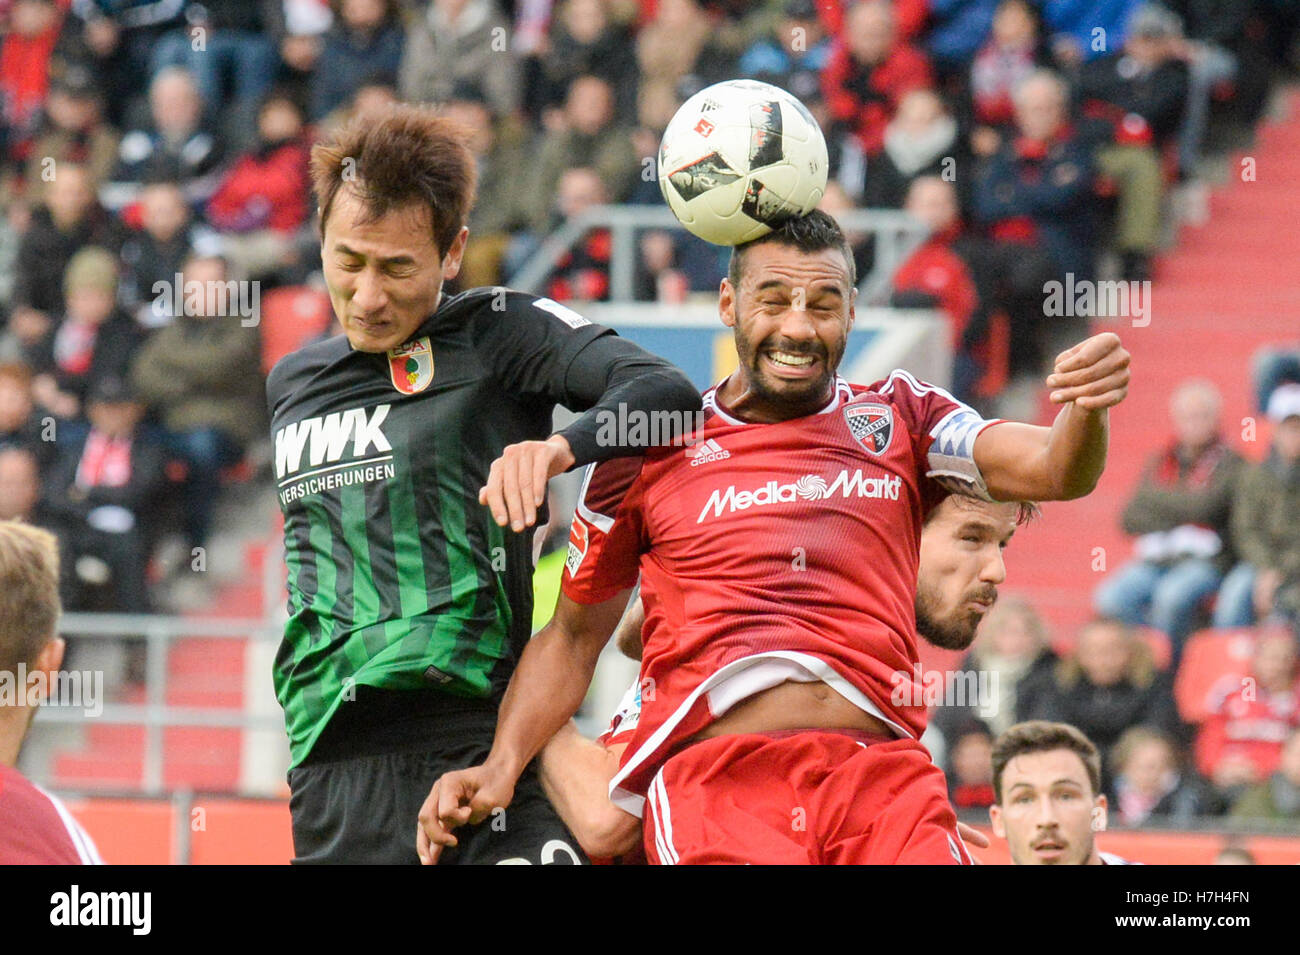 Ingolstadt, Germany. 5th Nov, 2016. Marvin Matip of Ingolstadt (r) and Dong-Won Ji of Augsburg vie for the ball in a header dual in the soccer match between FC Ingolstadt o4 and FC Augsburg on the tenth match day of the Bundesliga at Audi Sportpark in Ingolstadt, Germany, 5 November 2016. PHOTO: ARMIN WEIGEL/dpa (ATTENTION: Due to the accreditation guidelines, the DFL only permits the publication and utilisation of up to 15 pictures per match on the internet and in online media during the match.) Credit:  dpa/Alamy Live News Stock Photo